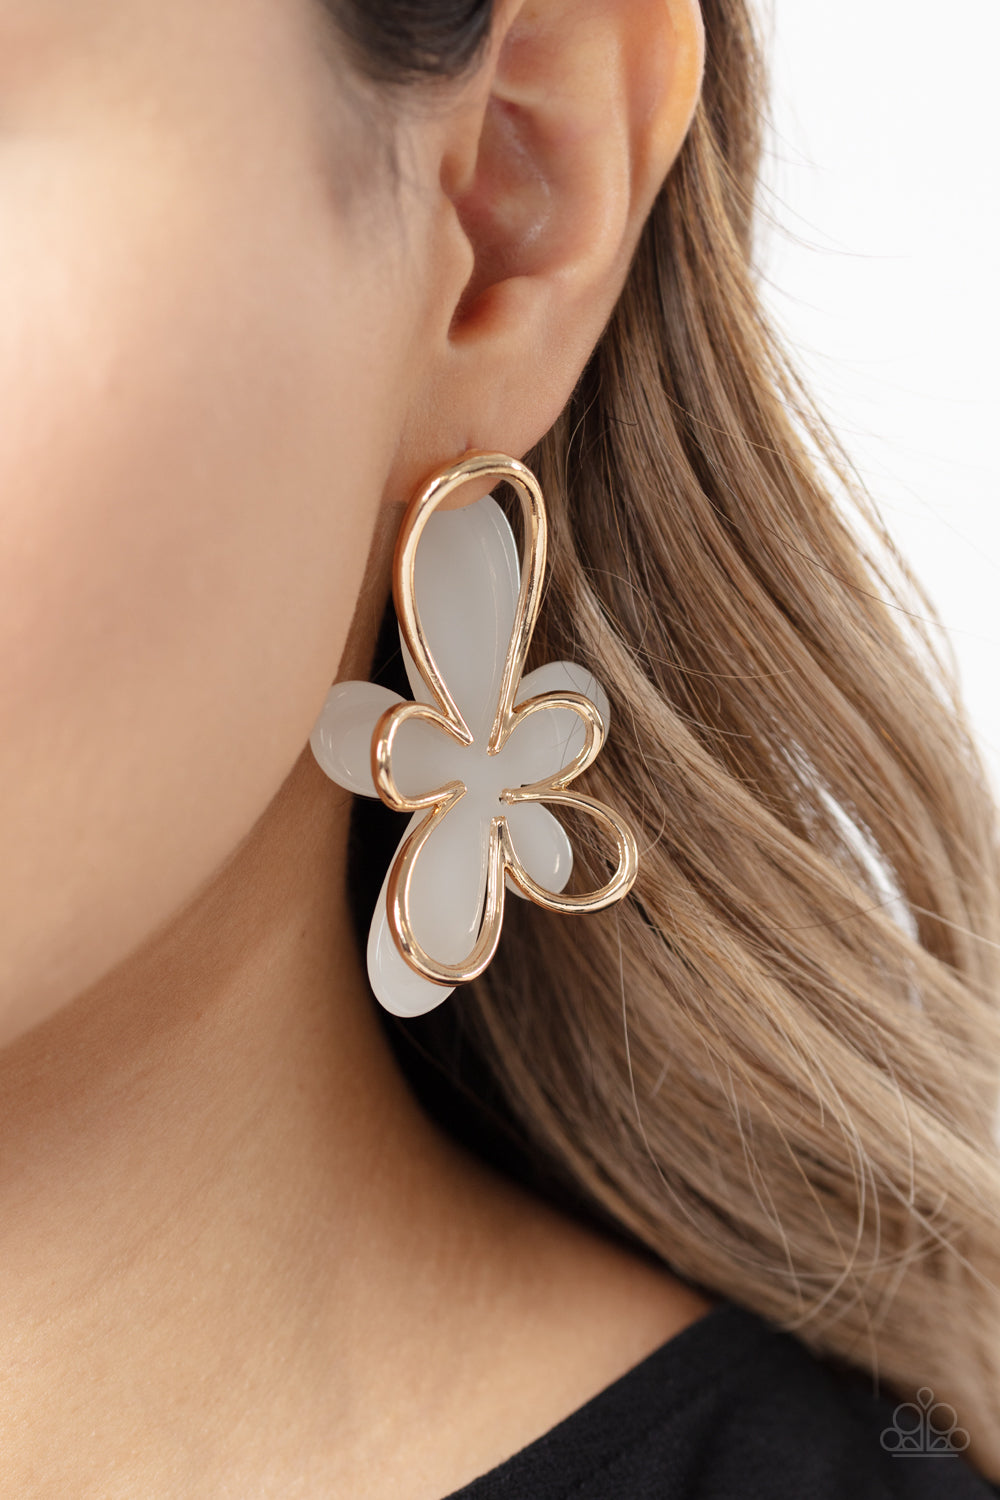 Glimmering Gardens Gold Flower Earring - Paparazzi Accessories  Overlapping a white abstract acrylic flower, a gold outline in the same abstract floral shape glimmers atop the pop of color for a three-dimensional fashionable lure. Earring attaches to a standard post fitting.  Sold as one pair of post earrings.  P5PO-GDXX-240XX